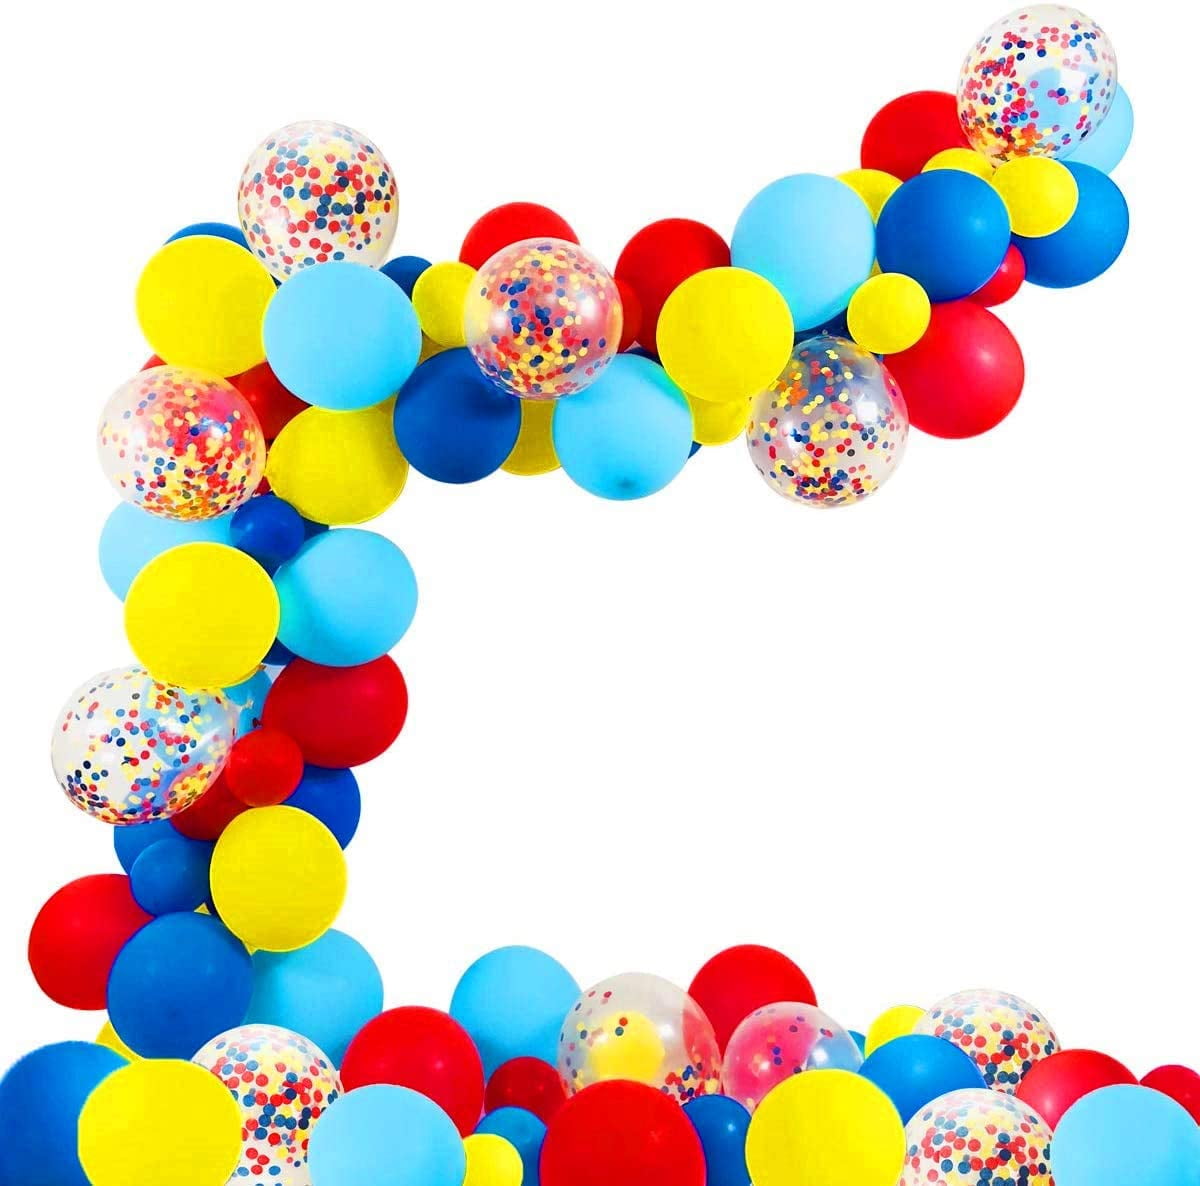 3 Circus Party Balloon Birthday Decorations For A Circus or Carnival Theme Event